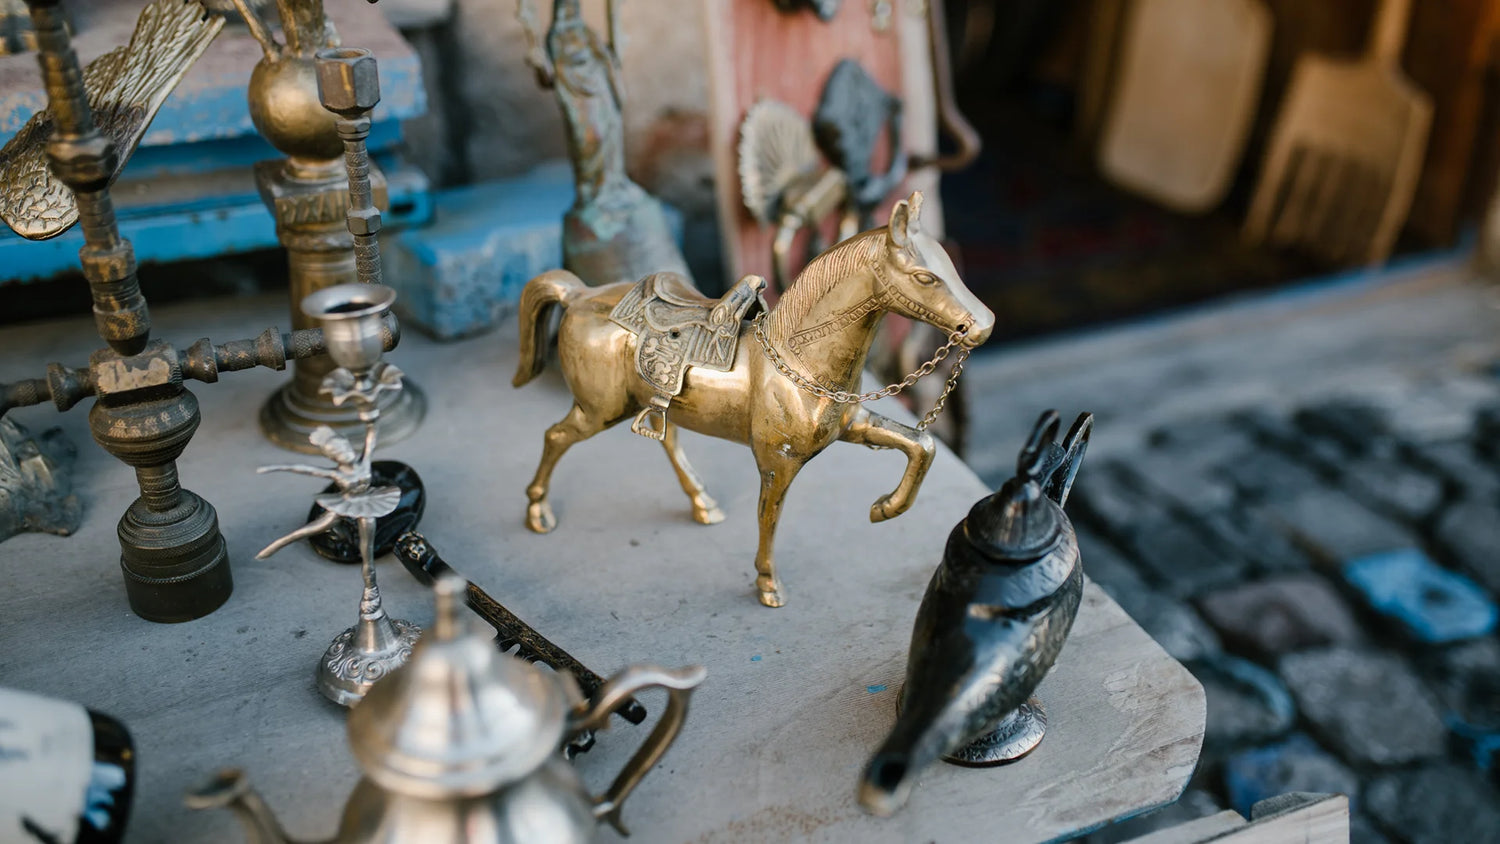 Sculpting Brass Statues and Figurines: A Revered Craft in India